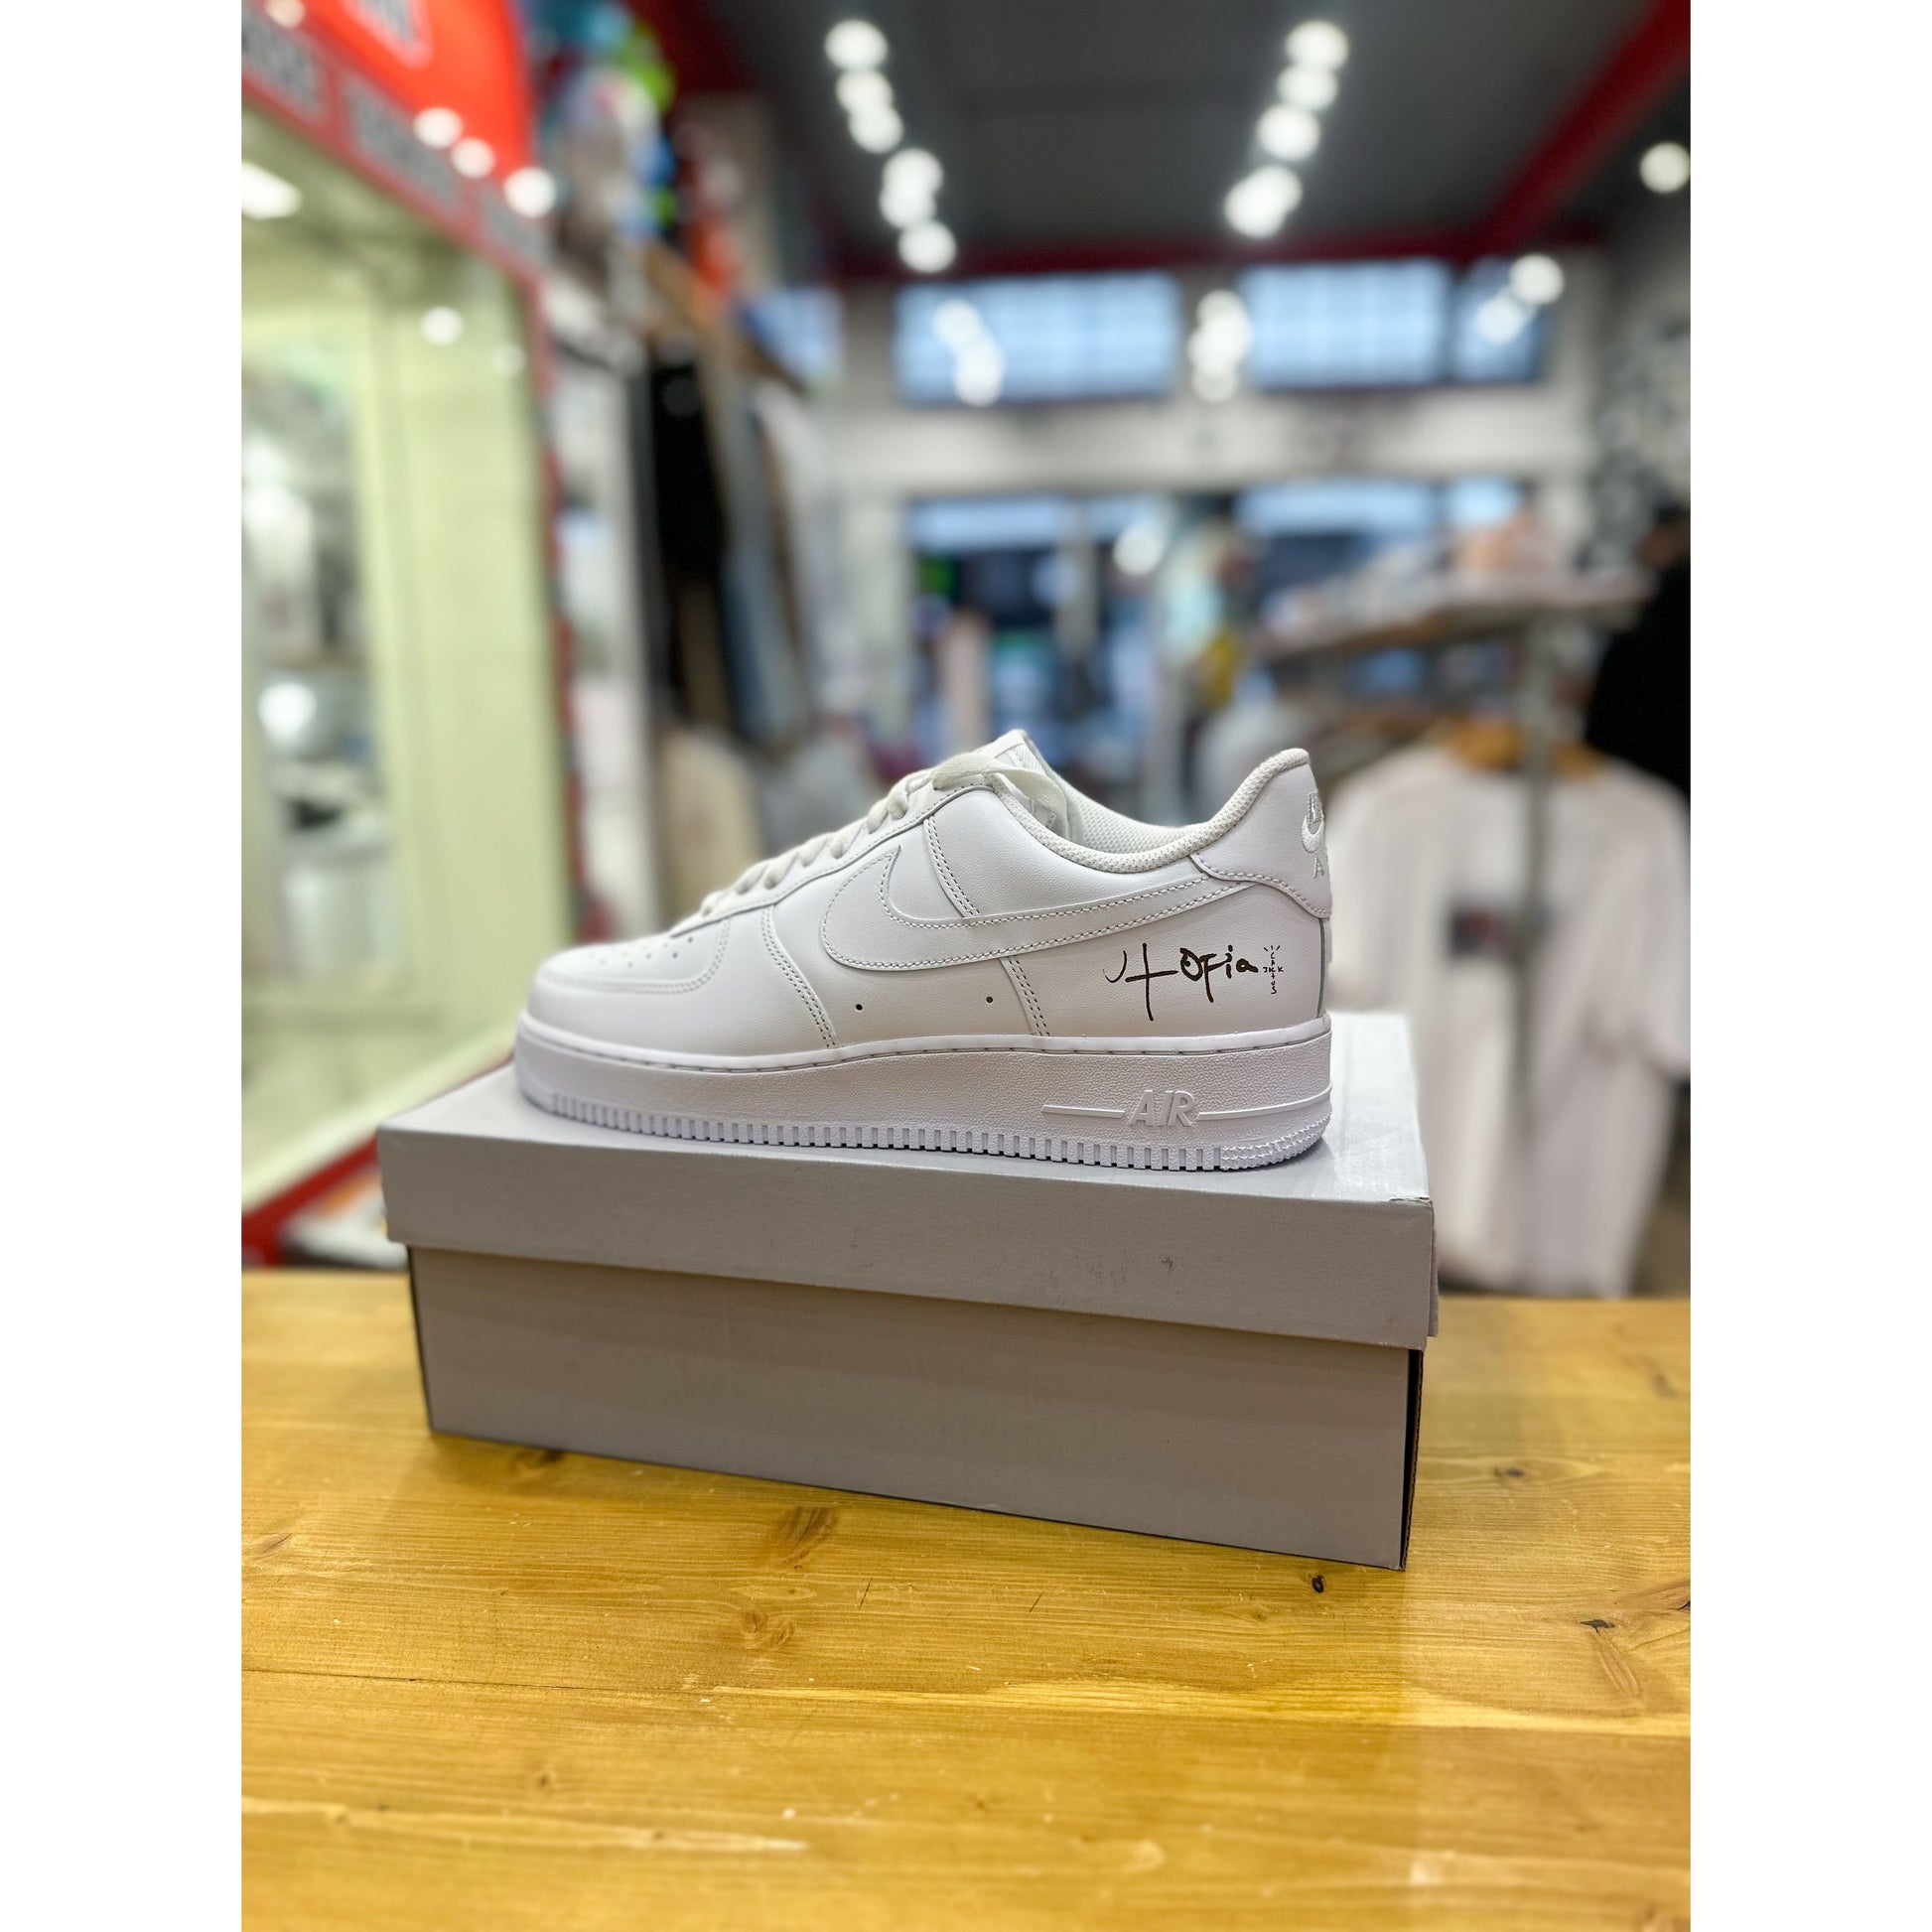 Nike Air Force 1 Low '07 White Travis Scott Cactus Jack Utopia Edition by Nike from £170.00